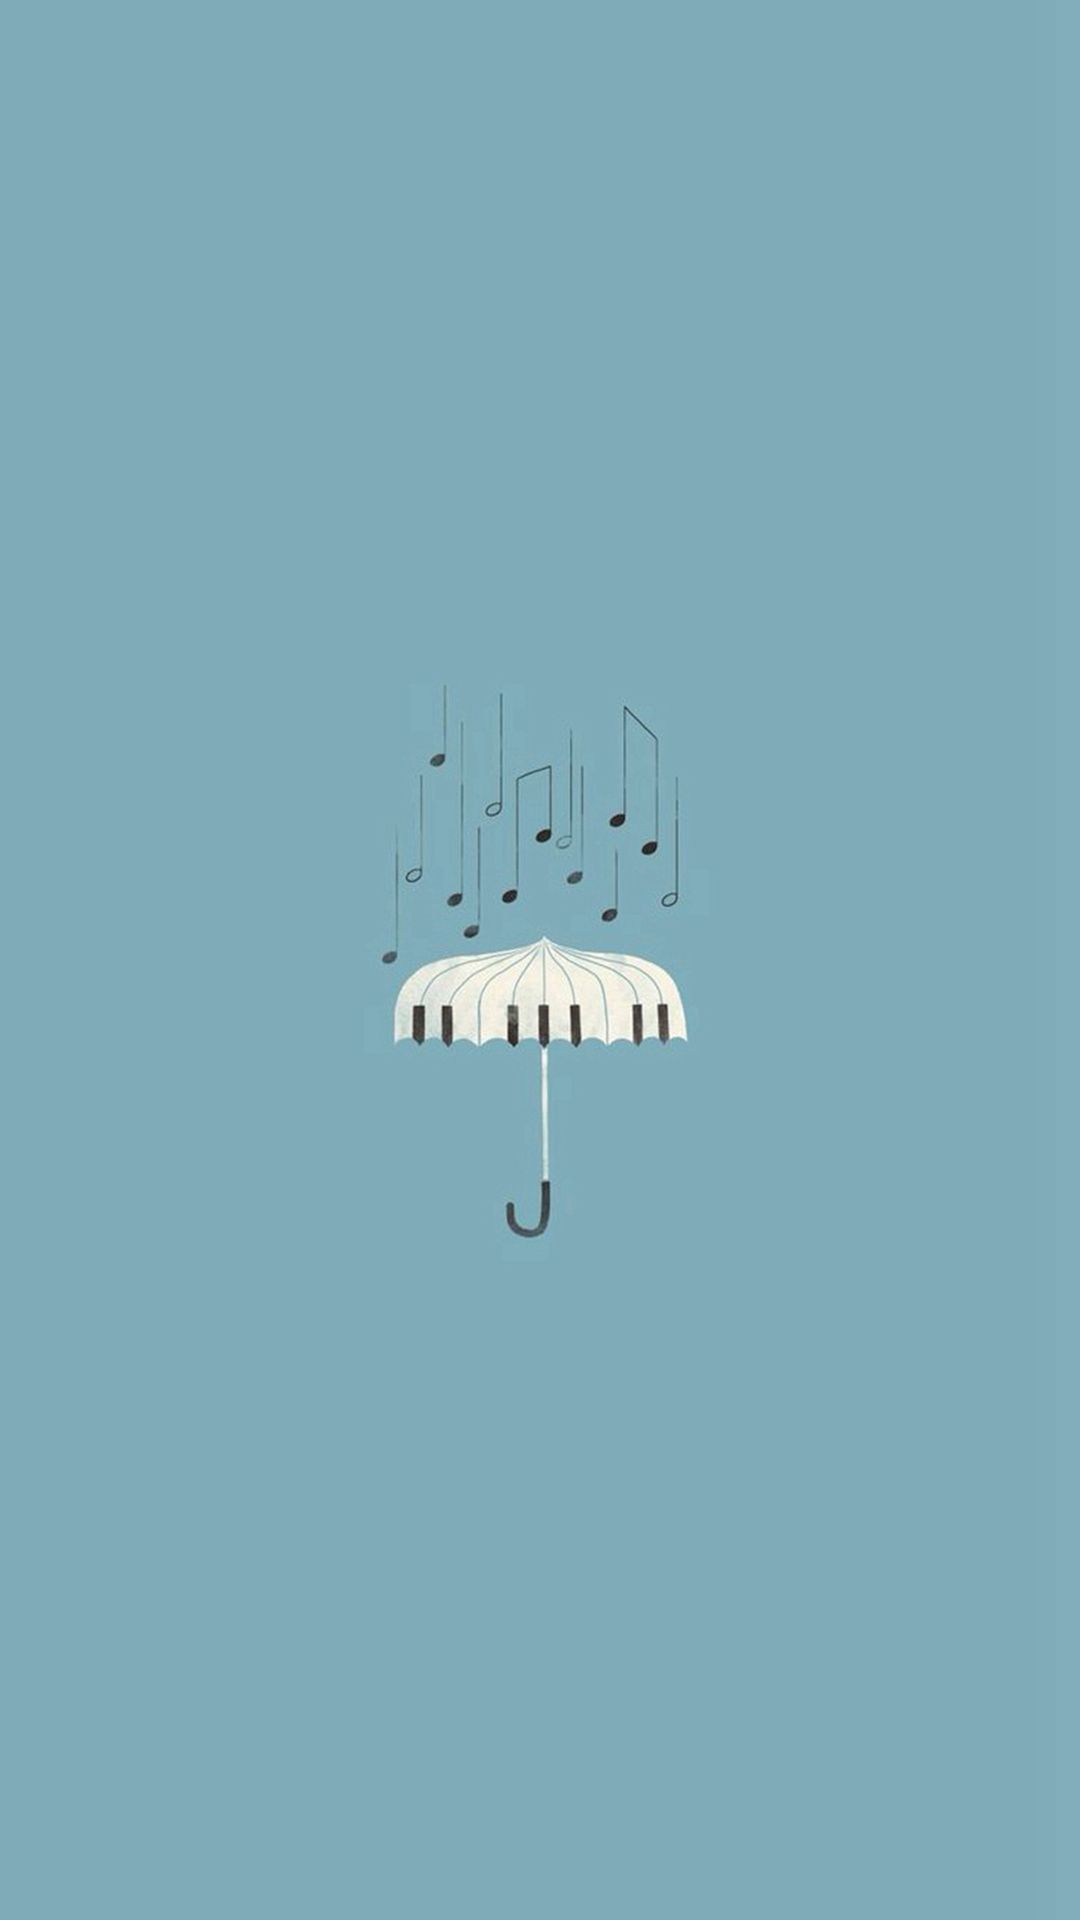 Aesthetic Piano Wallpaper Free Aesthetic Piano Background